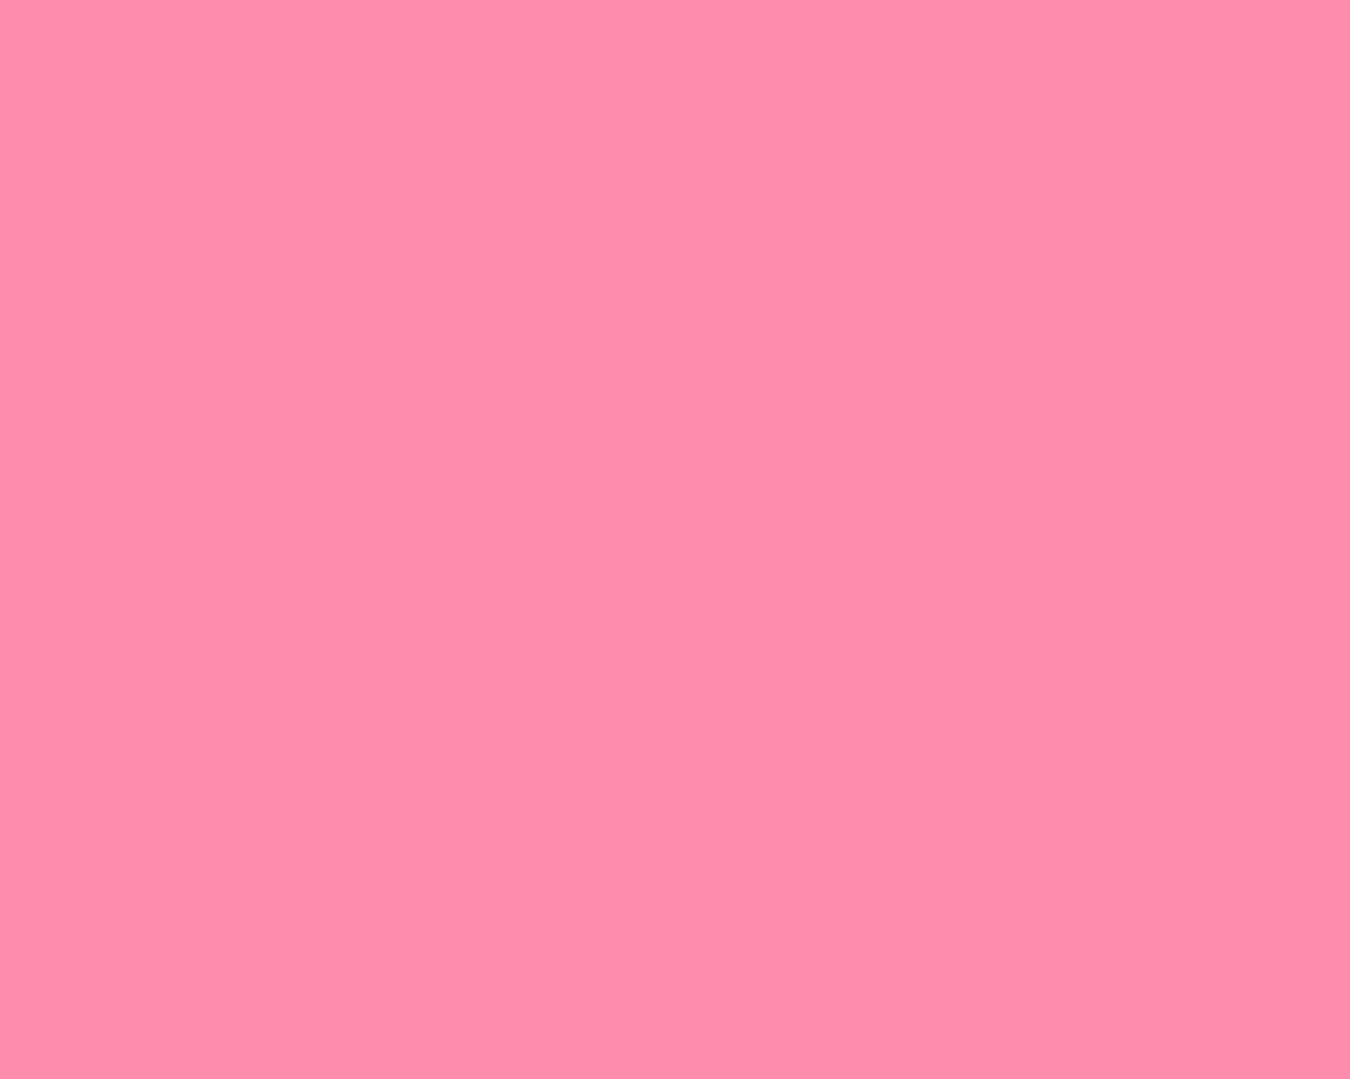 Solid Pink Background, A Vibrant and Versatile Color